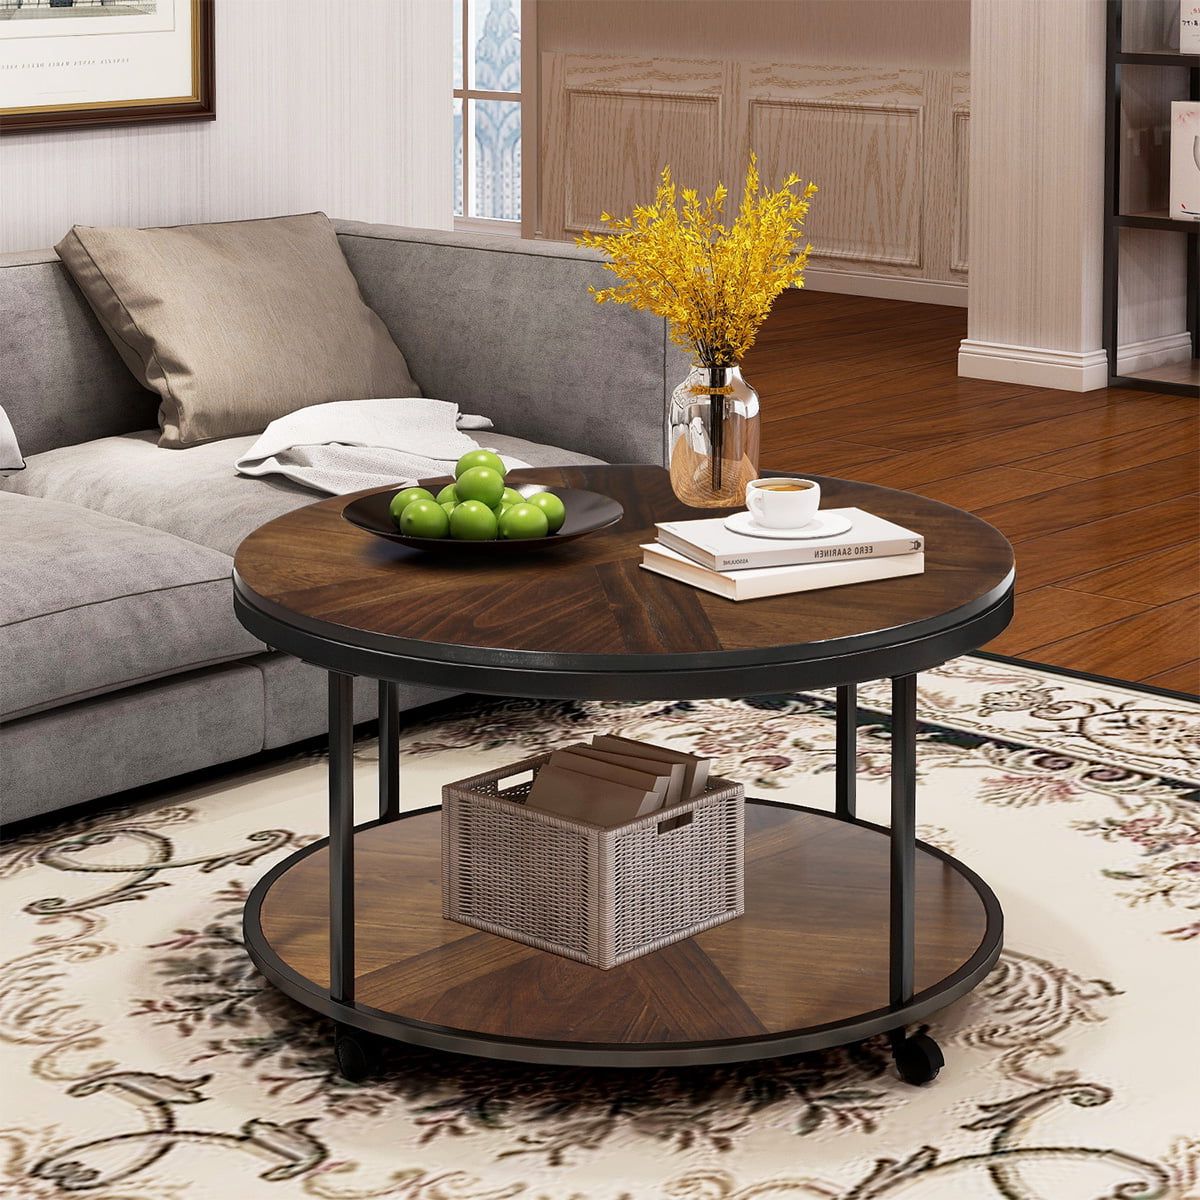 Sentern Round Coffee Table With Caster Wheels And Unique Textured Within Coffee Tables With Casters (Gallery 2 of 20)